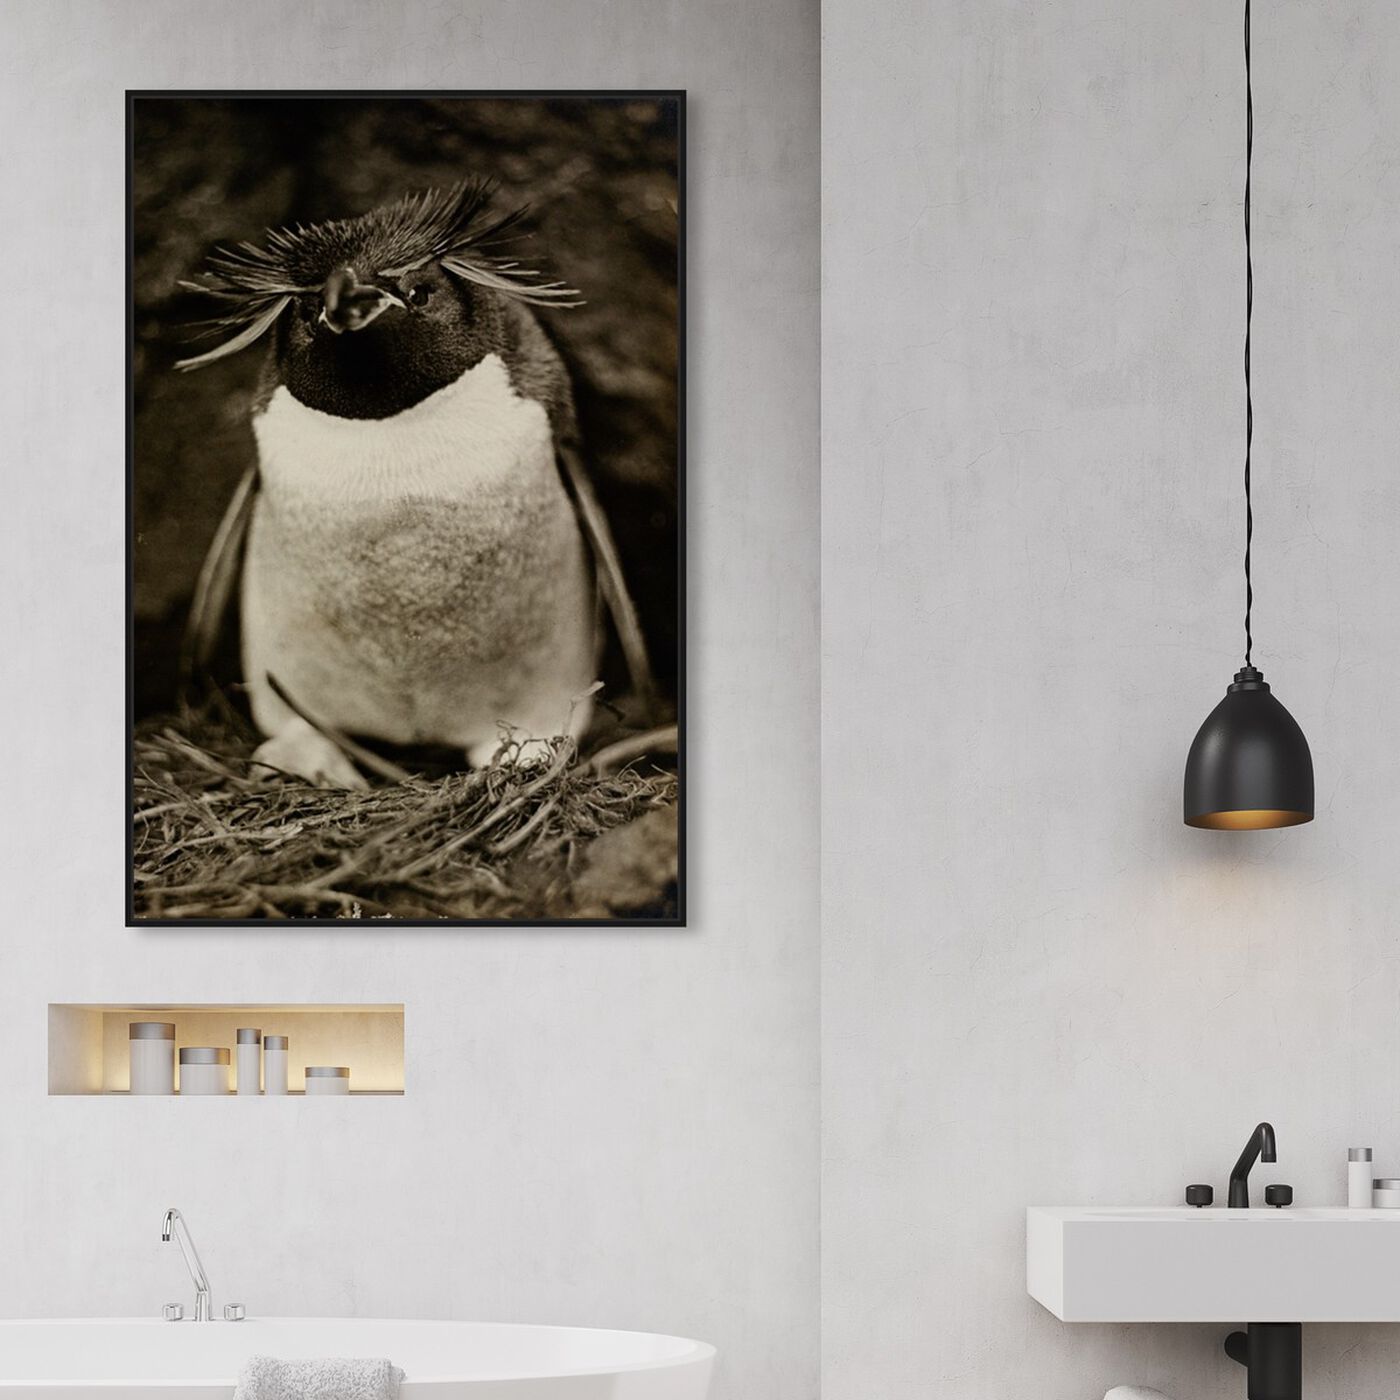 Hanging view of Sclater Penguin - The Art Cabinet featuring animals and birds art.